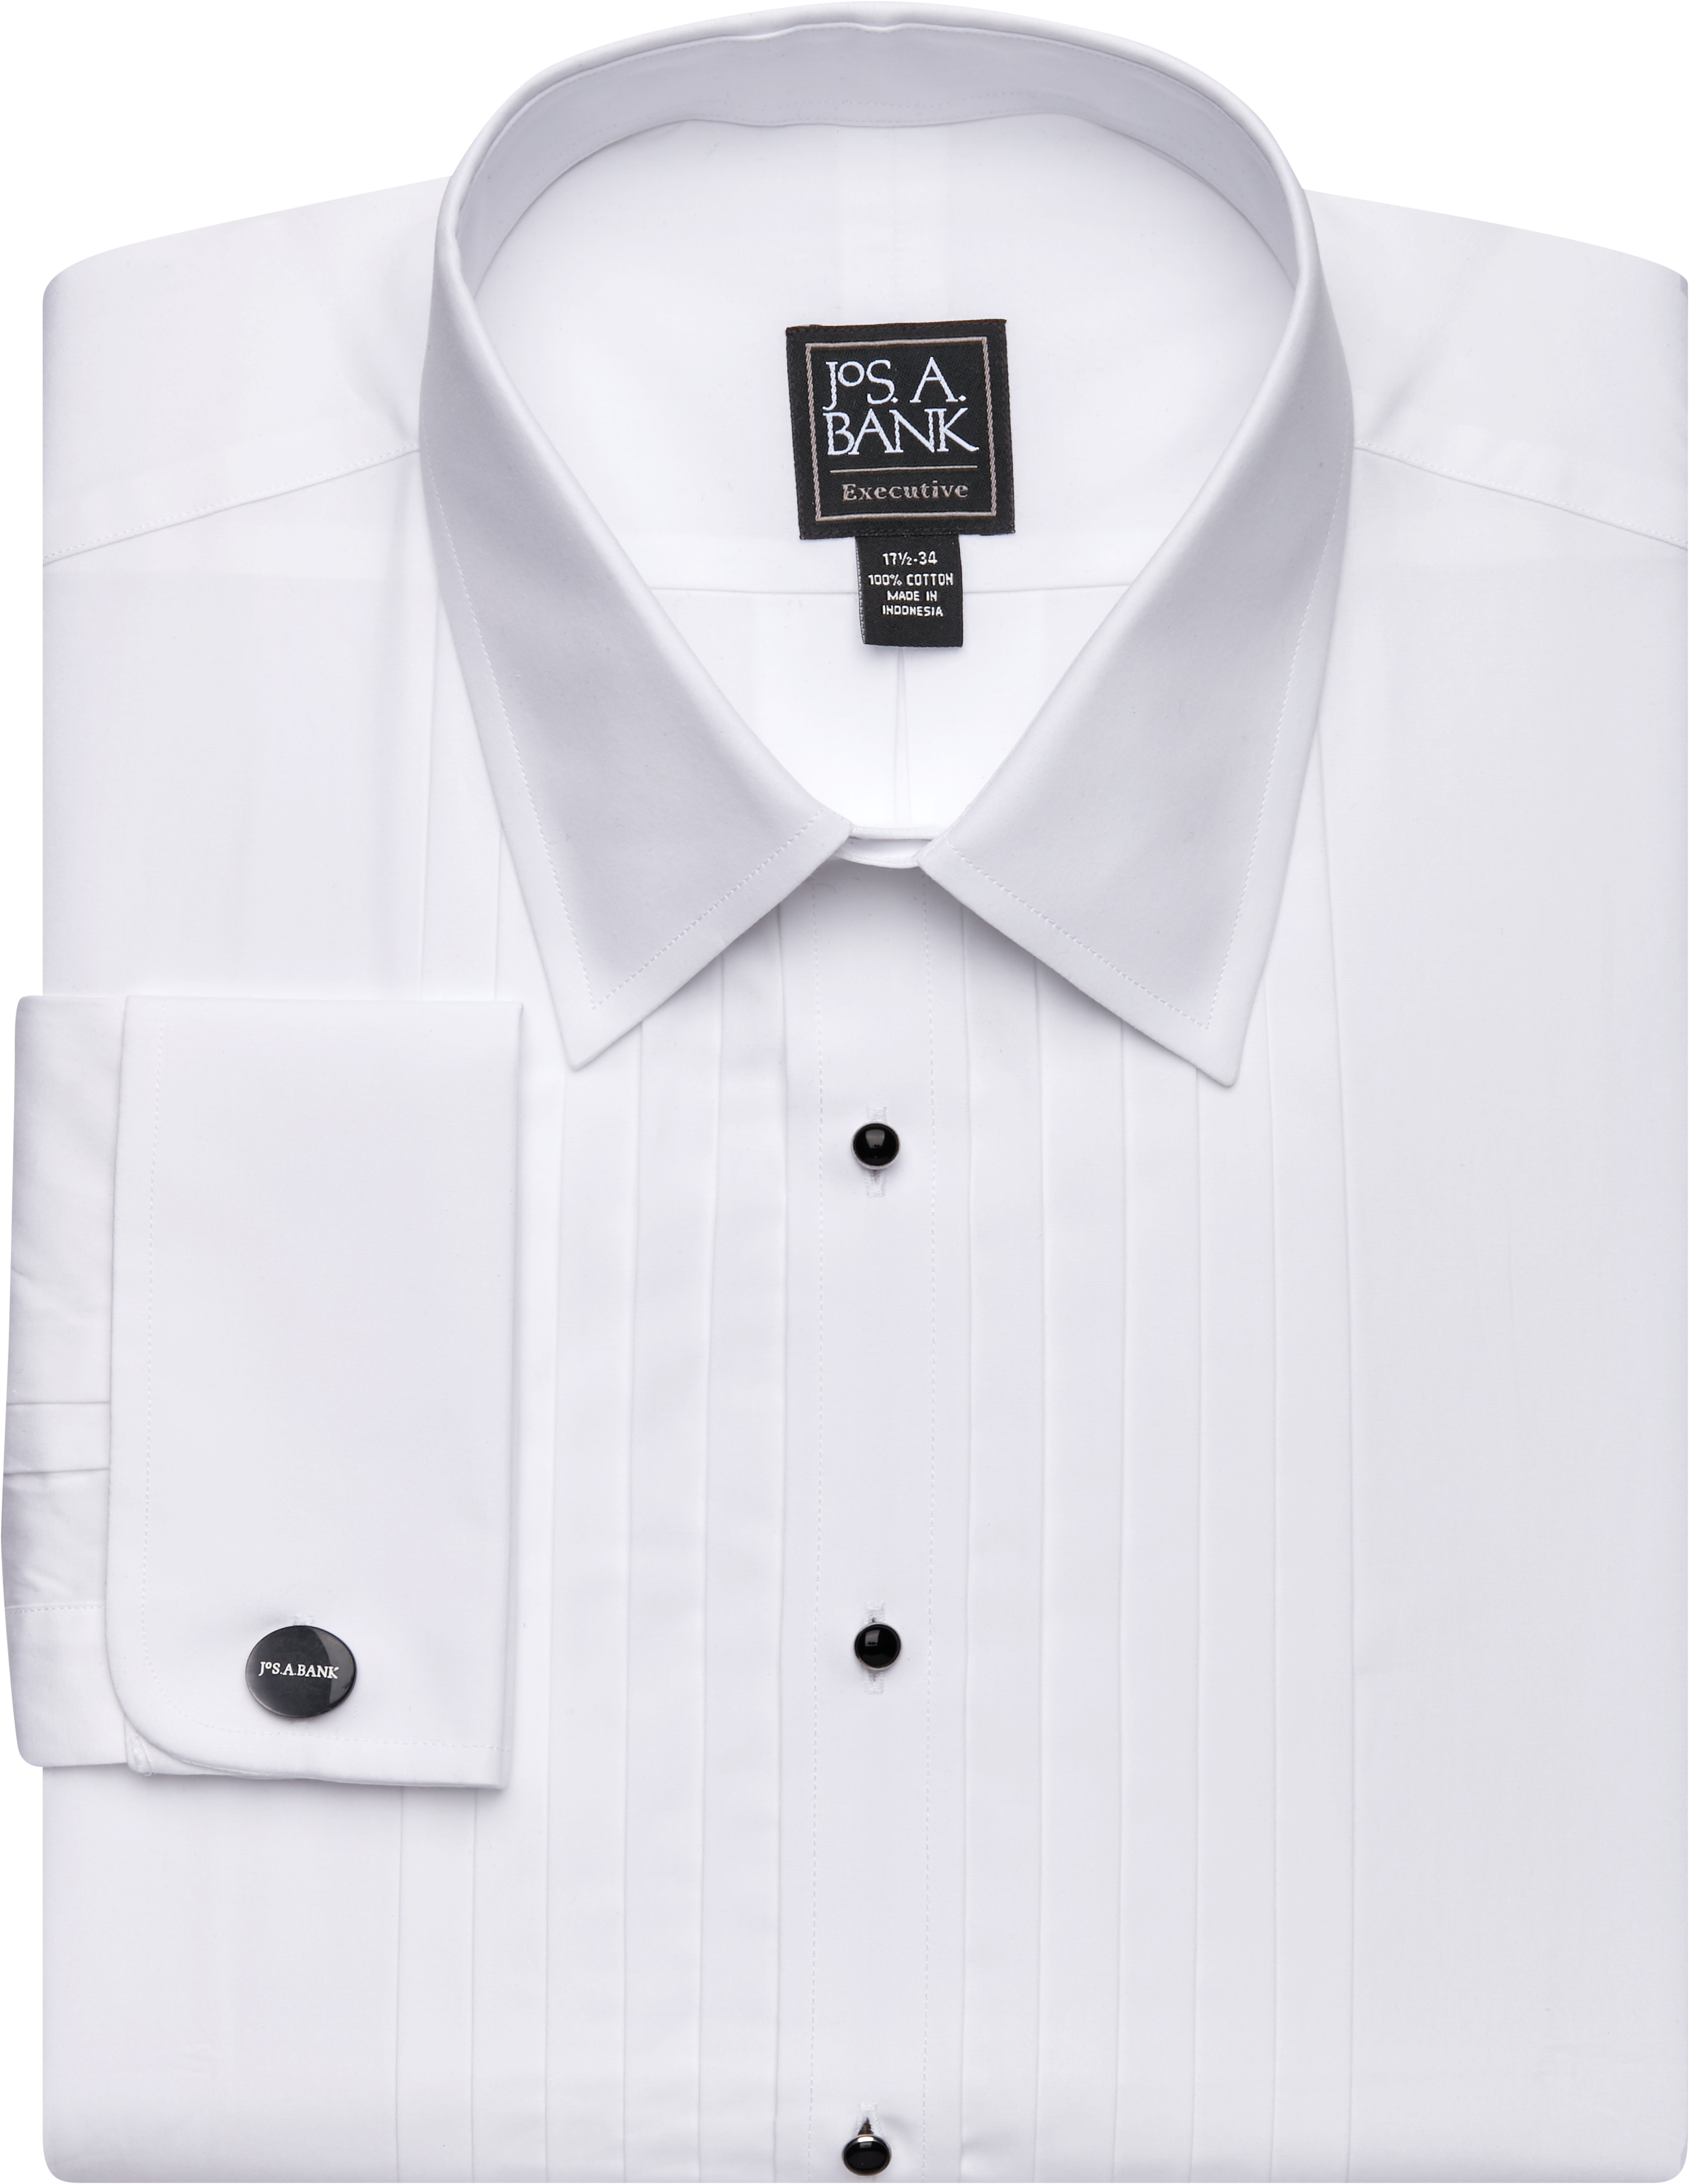 Image of JoS. A. Bank Men's Executive Collection Traditional Fit Point Collar French Cuff Formal Dress Shirt - Big & Tall, White, 22-35